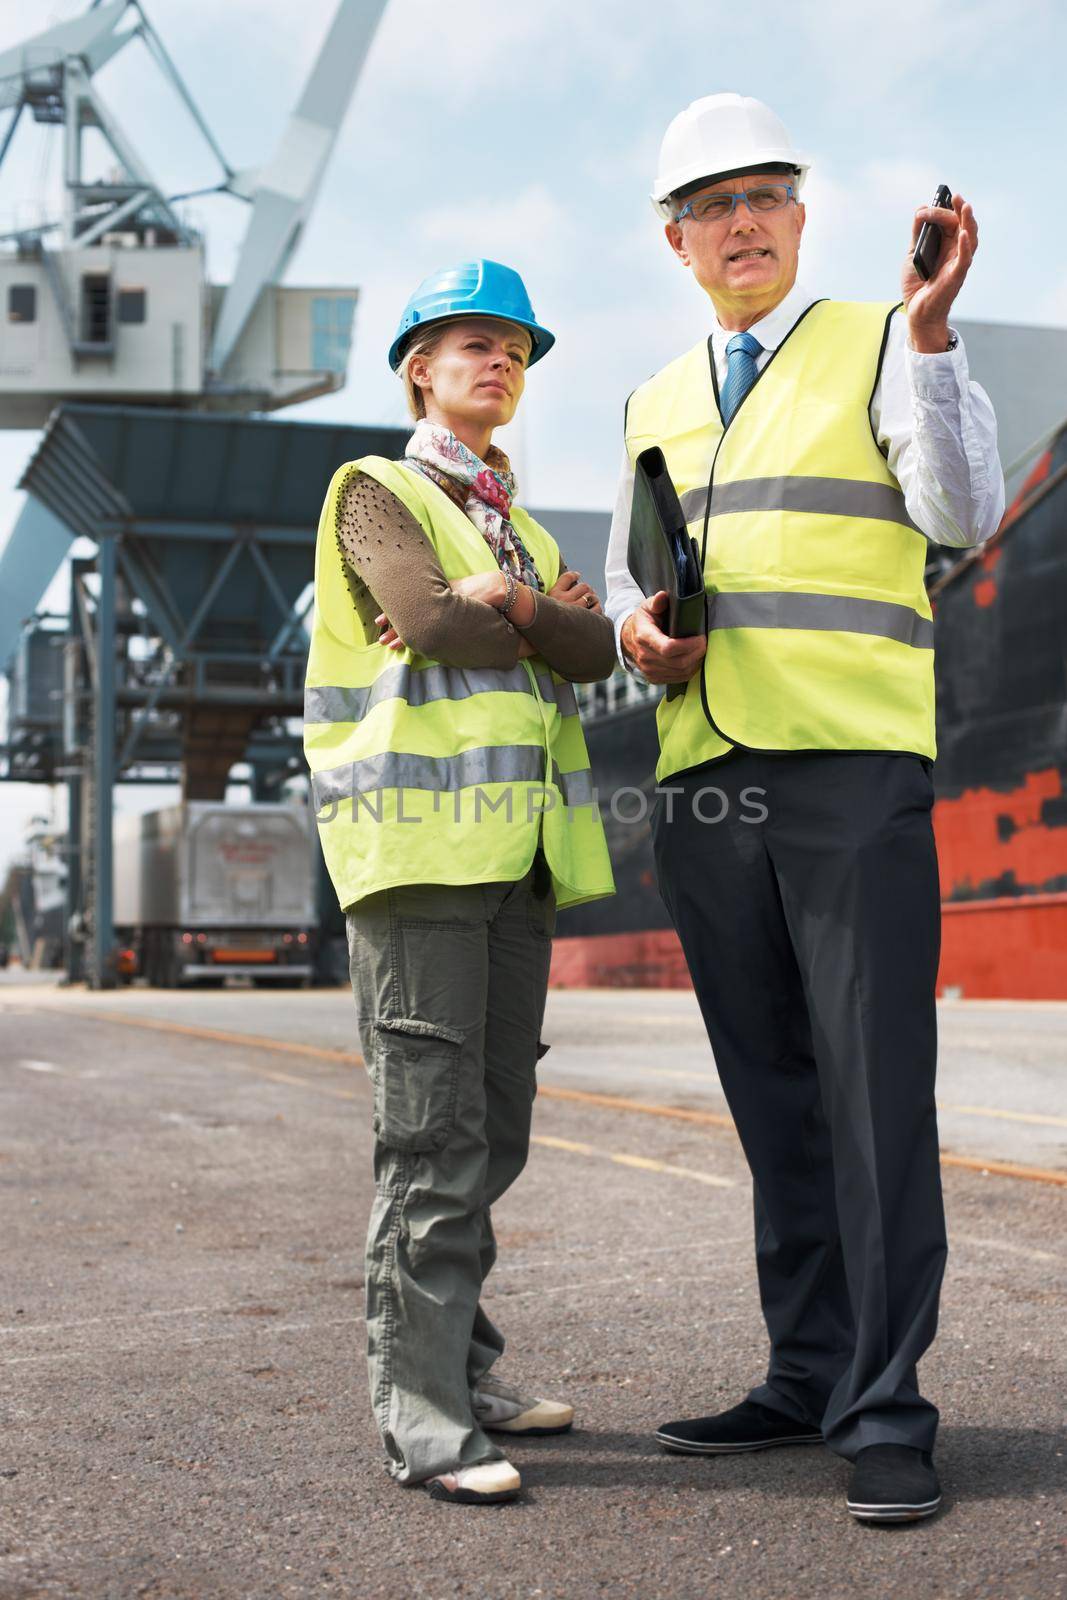 Effective communication among co-workers is vital. Two engineers discussing planning on a site while in the shipyard. by YuriArcurs